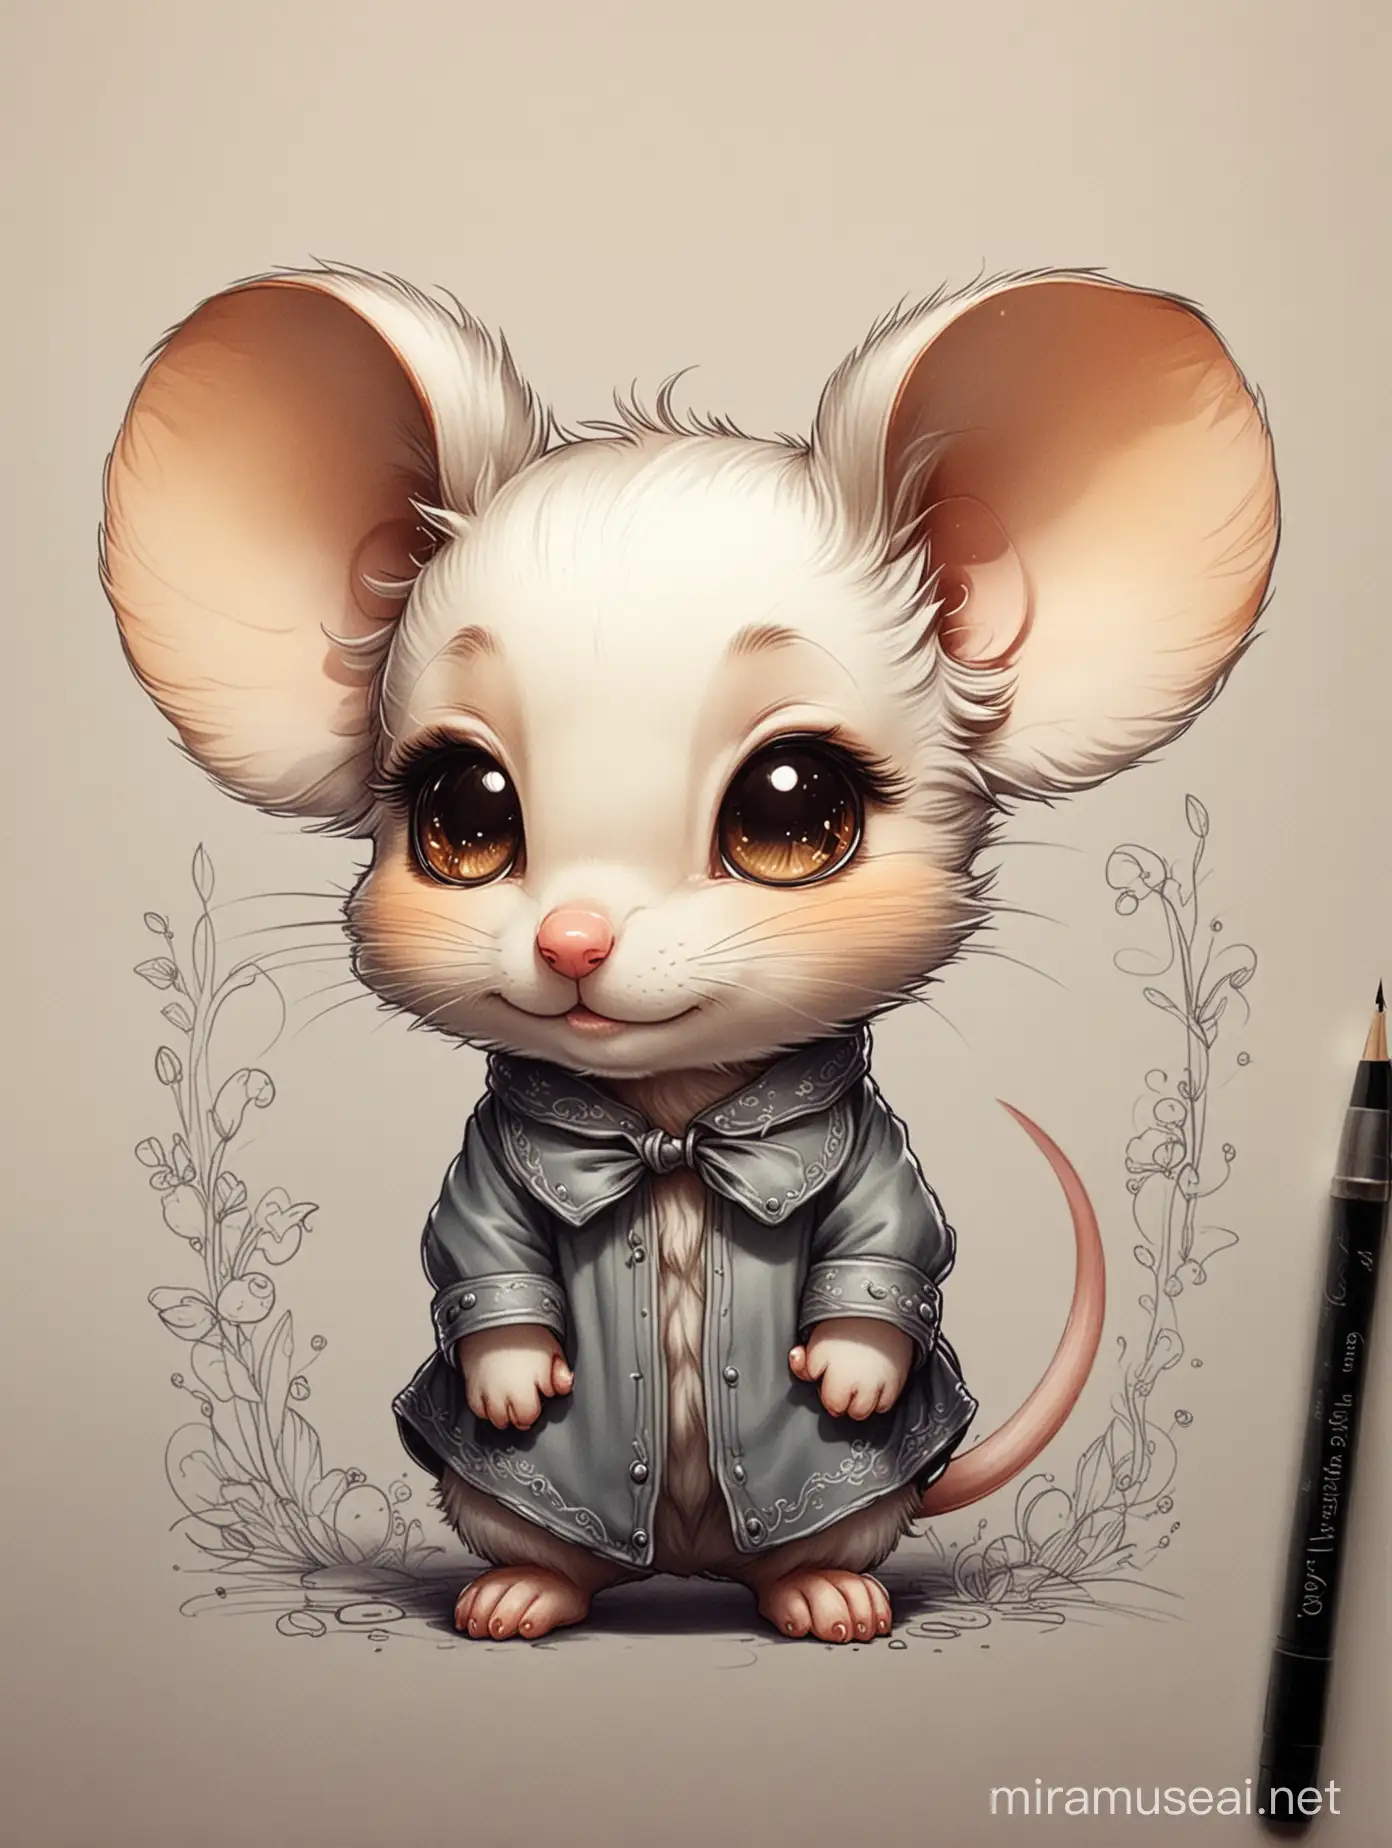 Chibi Mouse Masterpiece with Elegant Line Art and Deep Colors